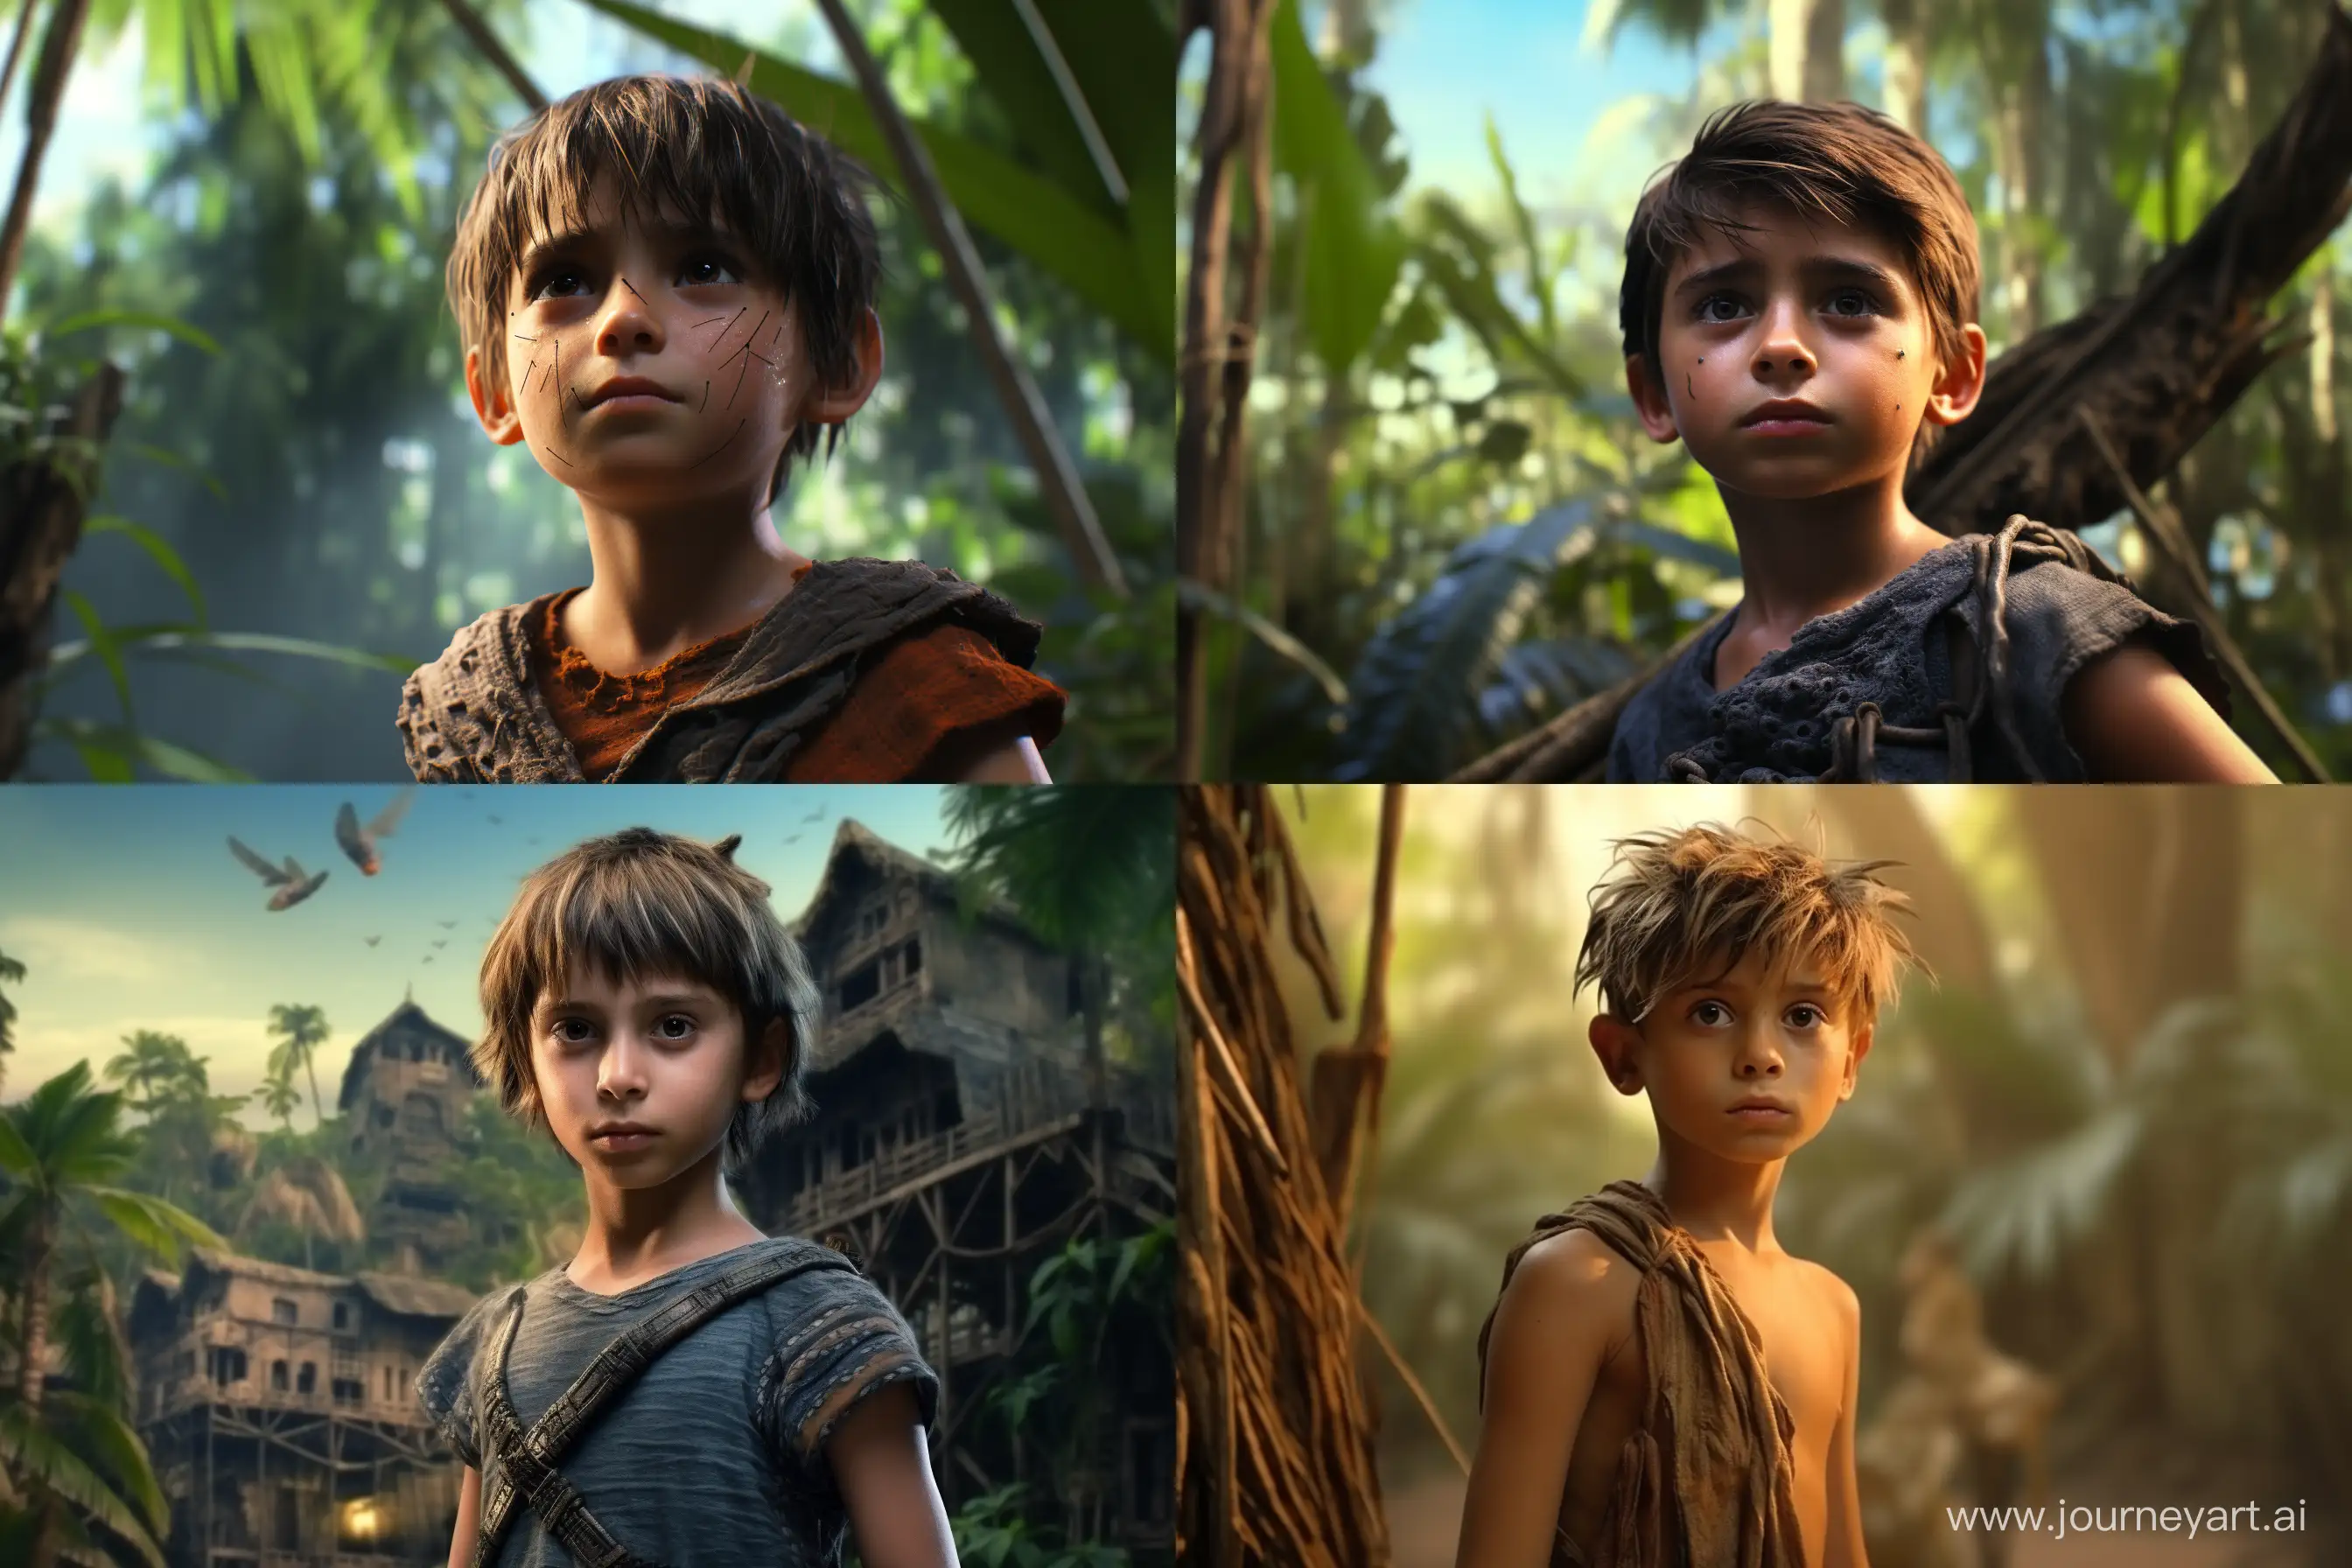 Curious-Boy-Explores-Enchanting-Jungle-Village-in-Stunning-8K-HyperRealistic-Animation